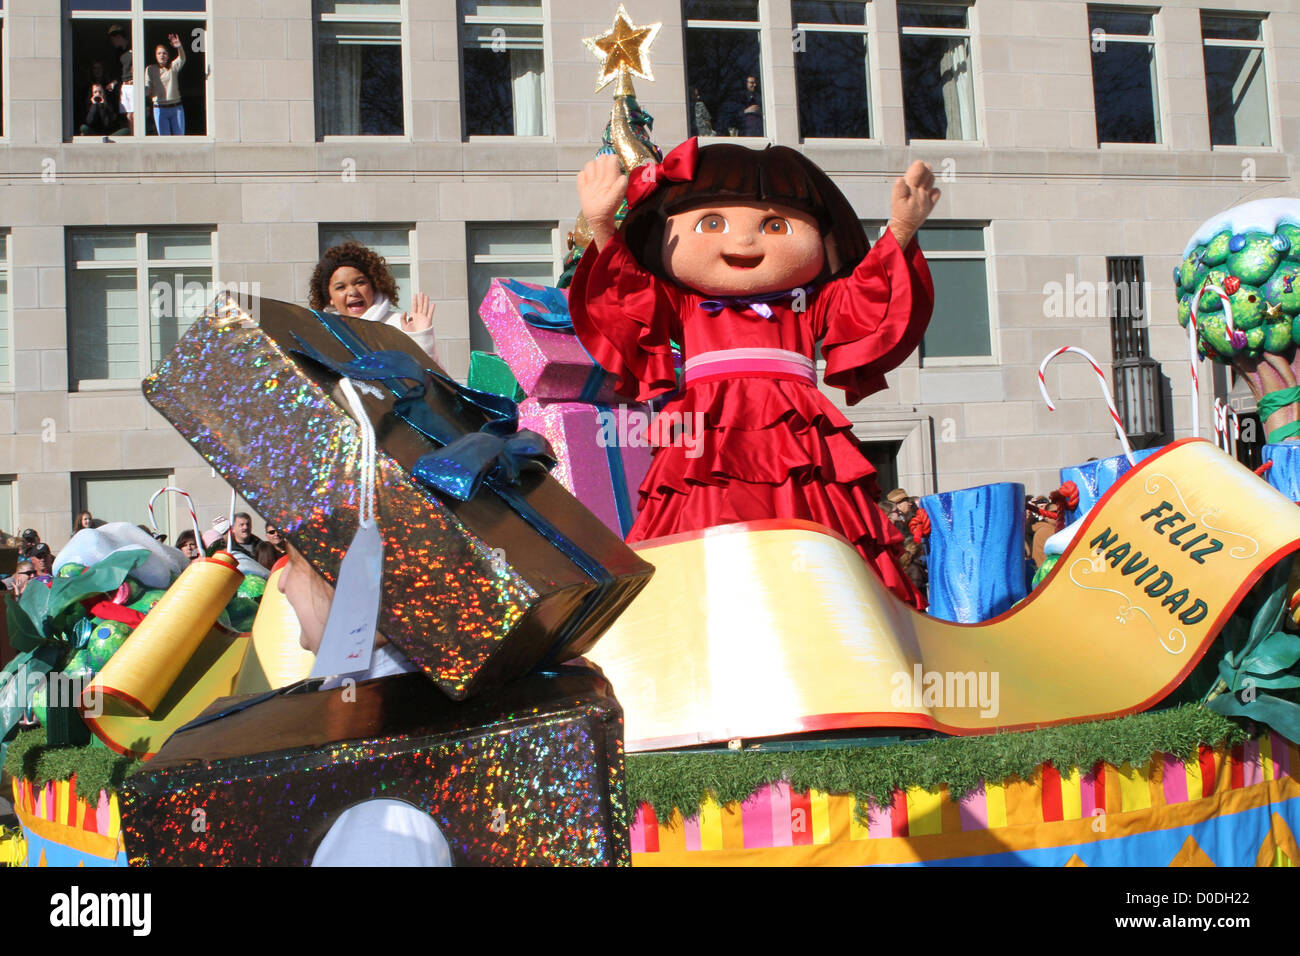 Dora's Christmas Carol Adventure float moves down Central Park West during Macy's Thanksgiving Day Parade in New York City, on Thursday, Nov. 22, 2012. Stock Photo